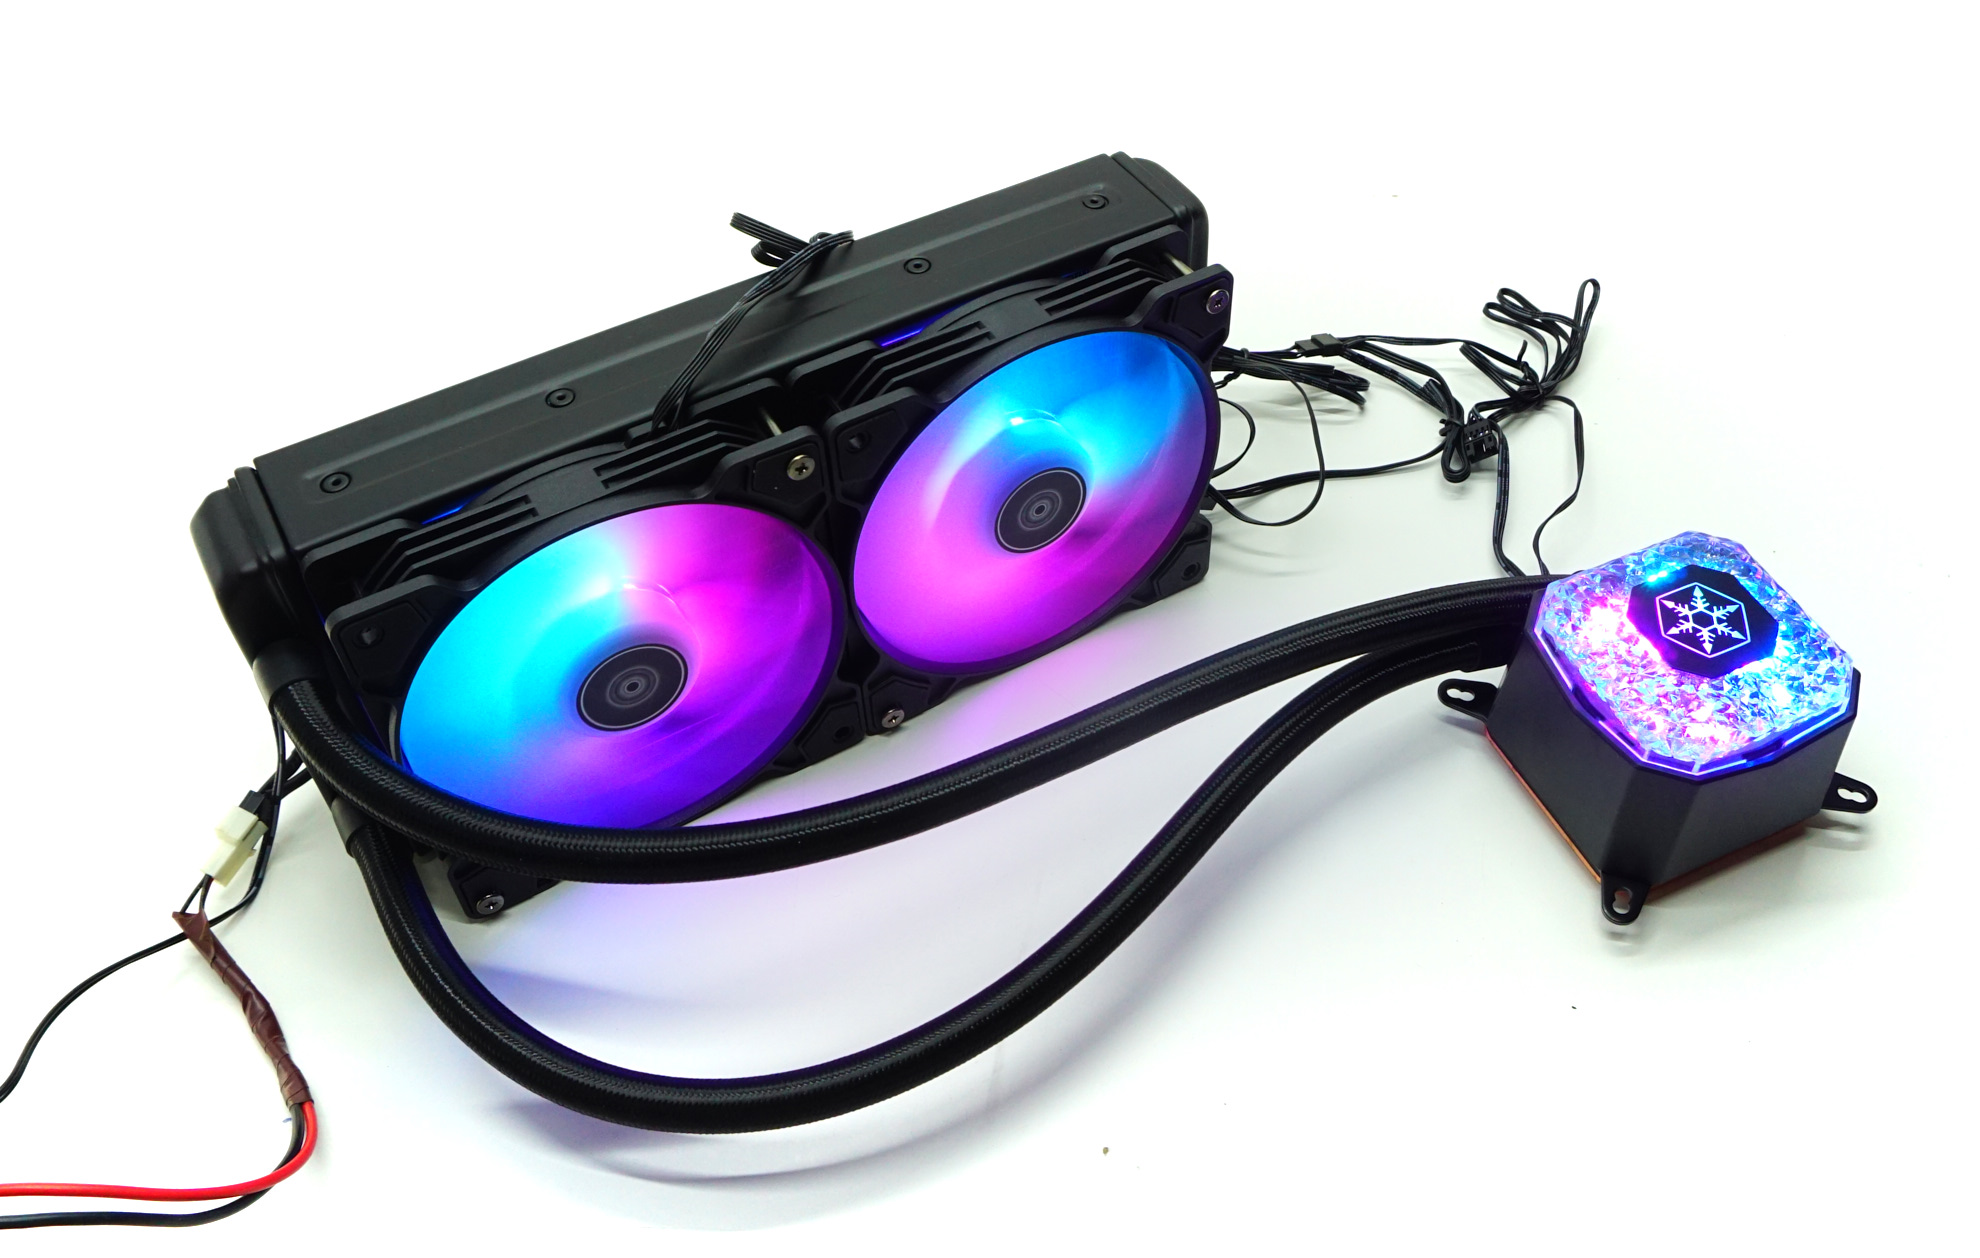 Final Words & Conclusion - The SilverStone IceGem AIO Coolers 